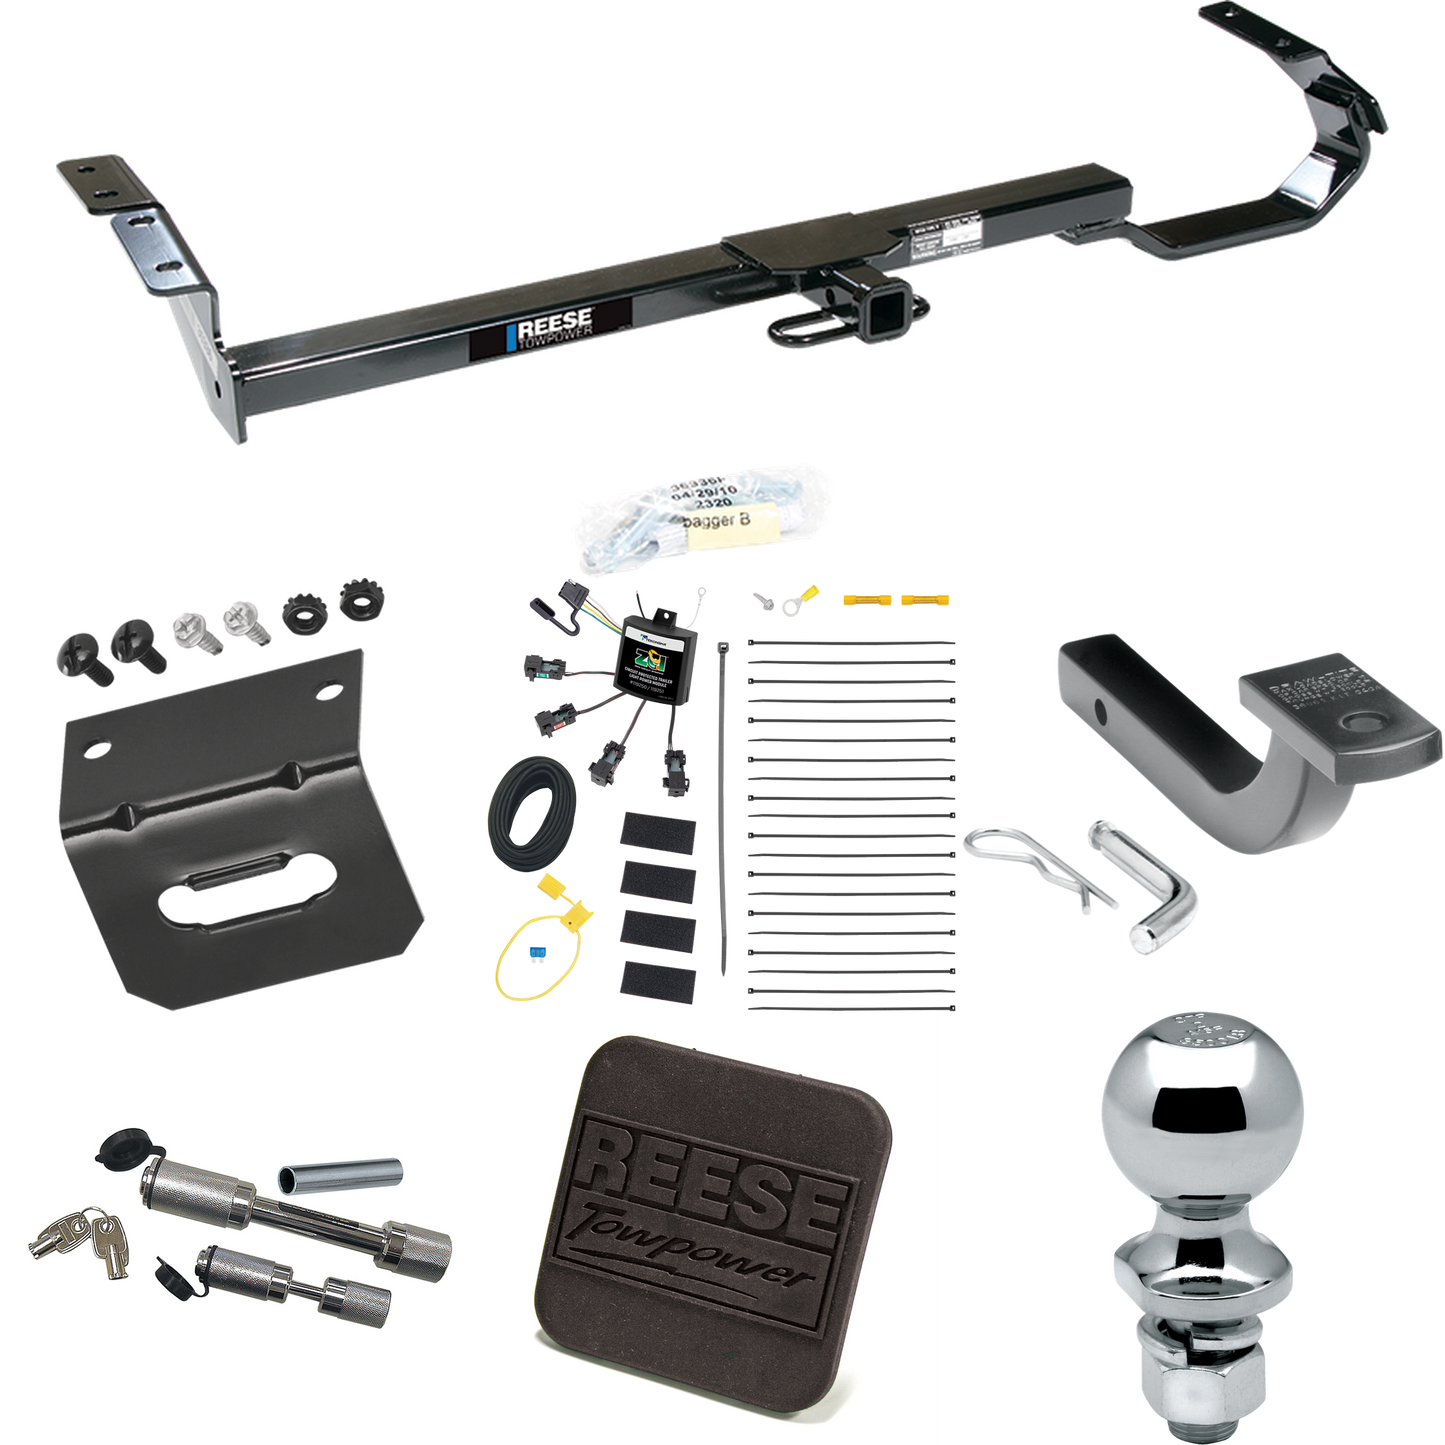 Fits 2004-2006 Lexus ES330 Trailer Hitch Tow PKG w/ 4-Flat Zero Contact "No Splice" Wiring Harness + Draw-Bar + 2" Ball + Wiring Bracket + Hitch Cover + Dual Hitch & Coupler Locks By Reese Towpower